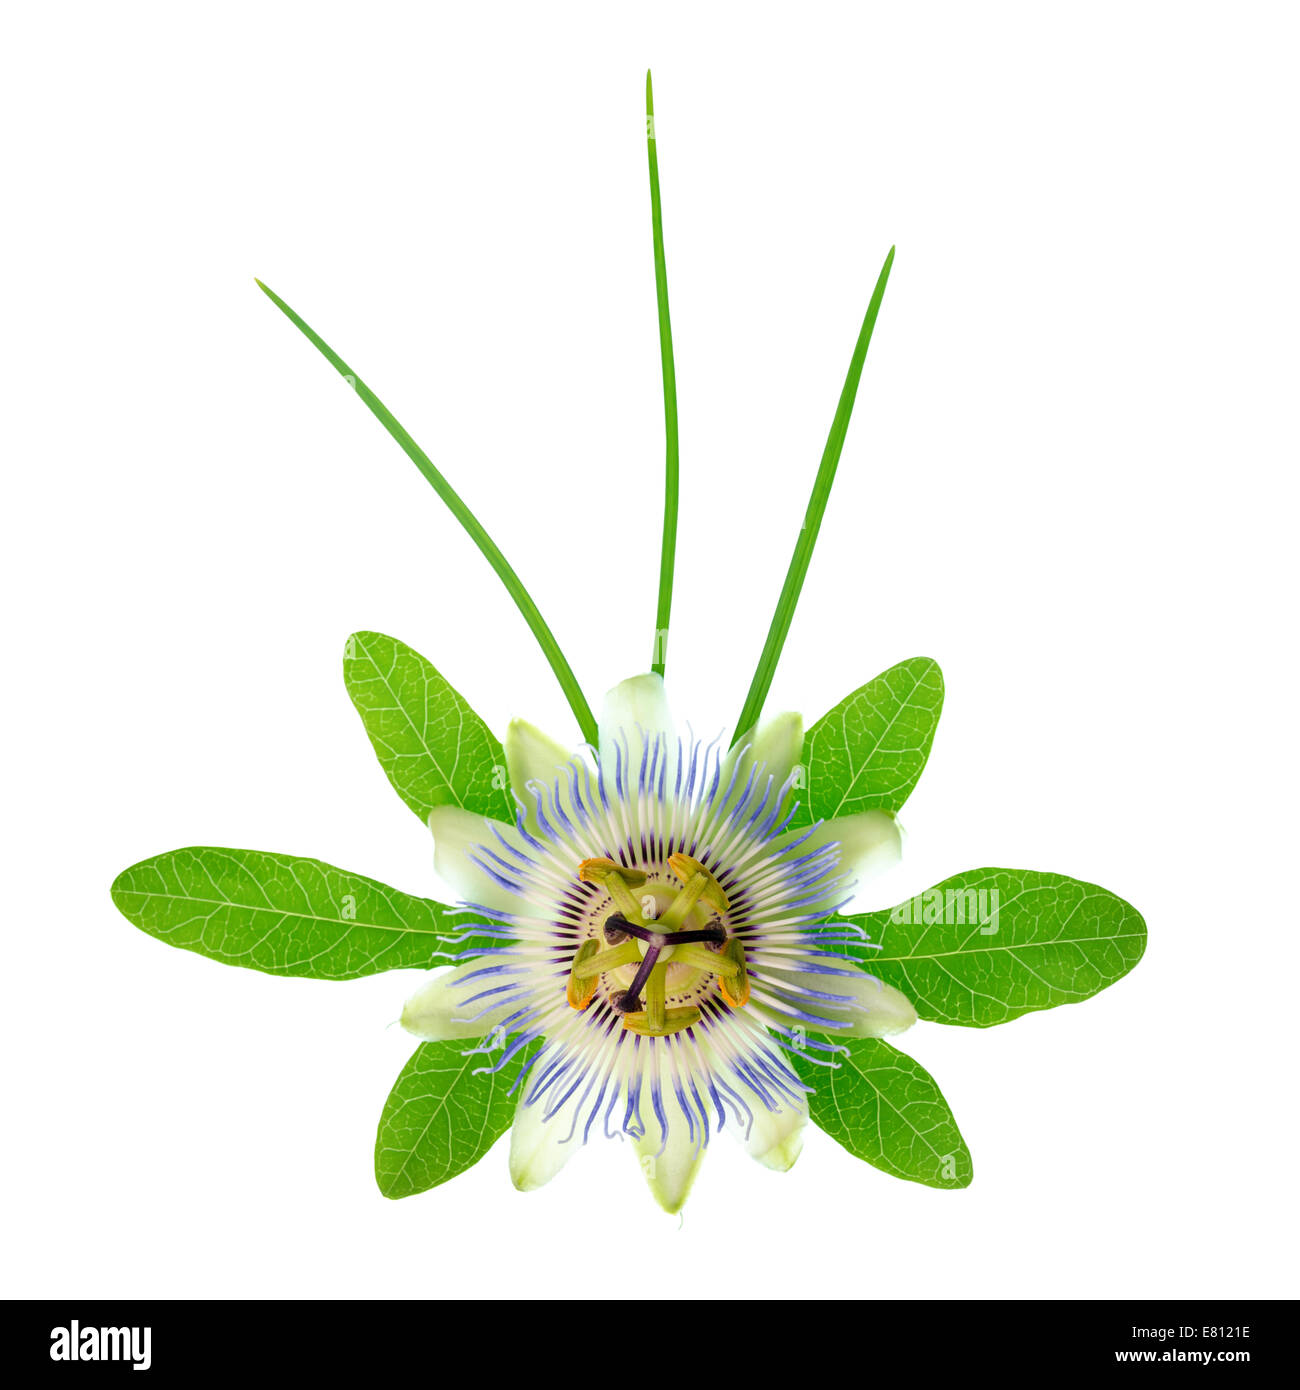 blooming fresh passionflower flower with leaves and foliage is isolated on white background Stock Photo